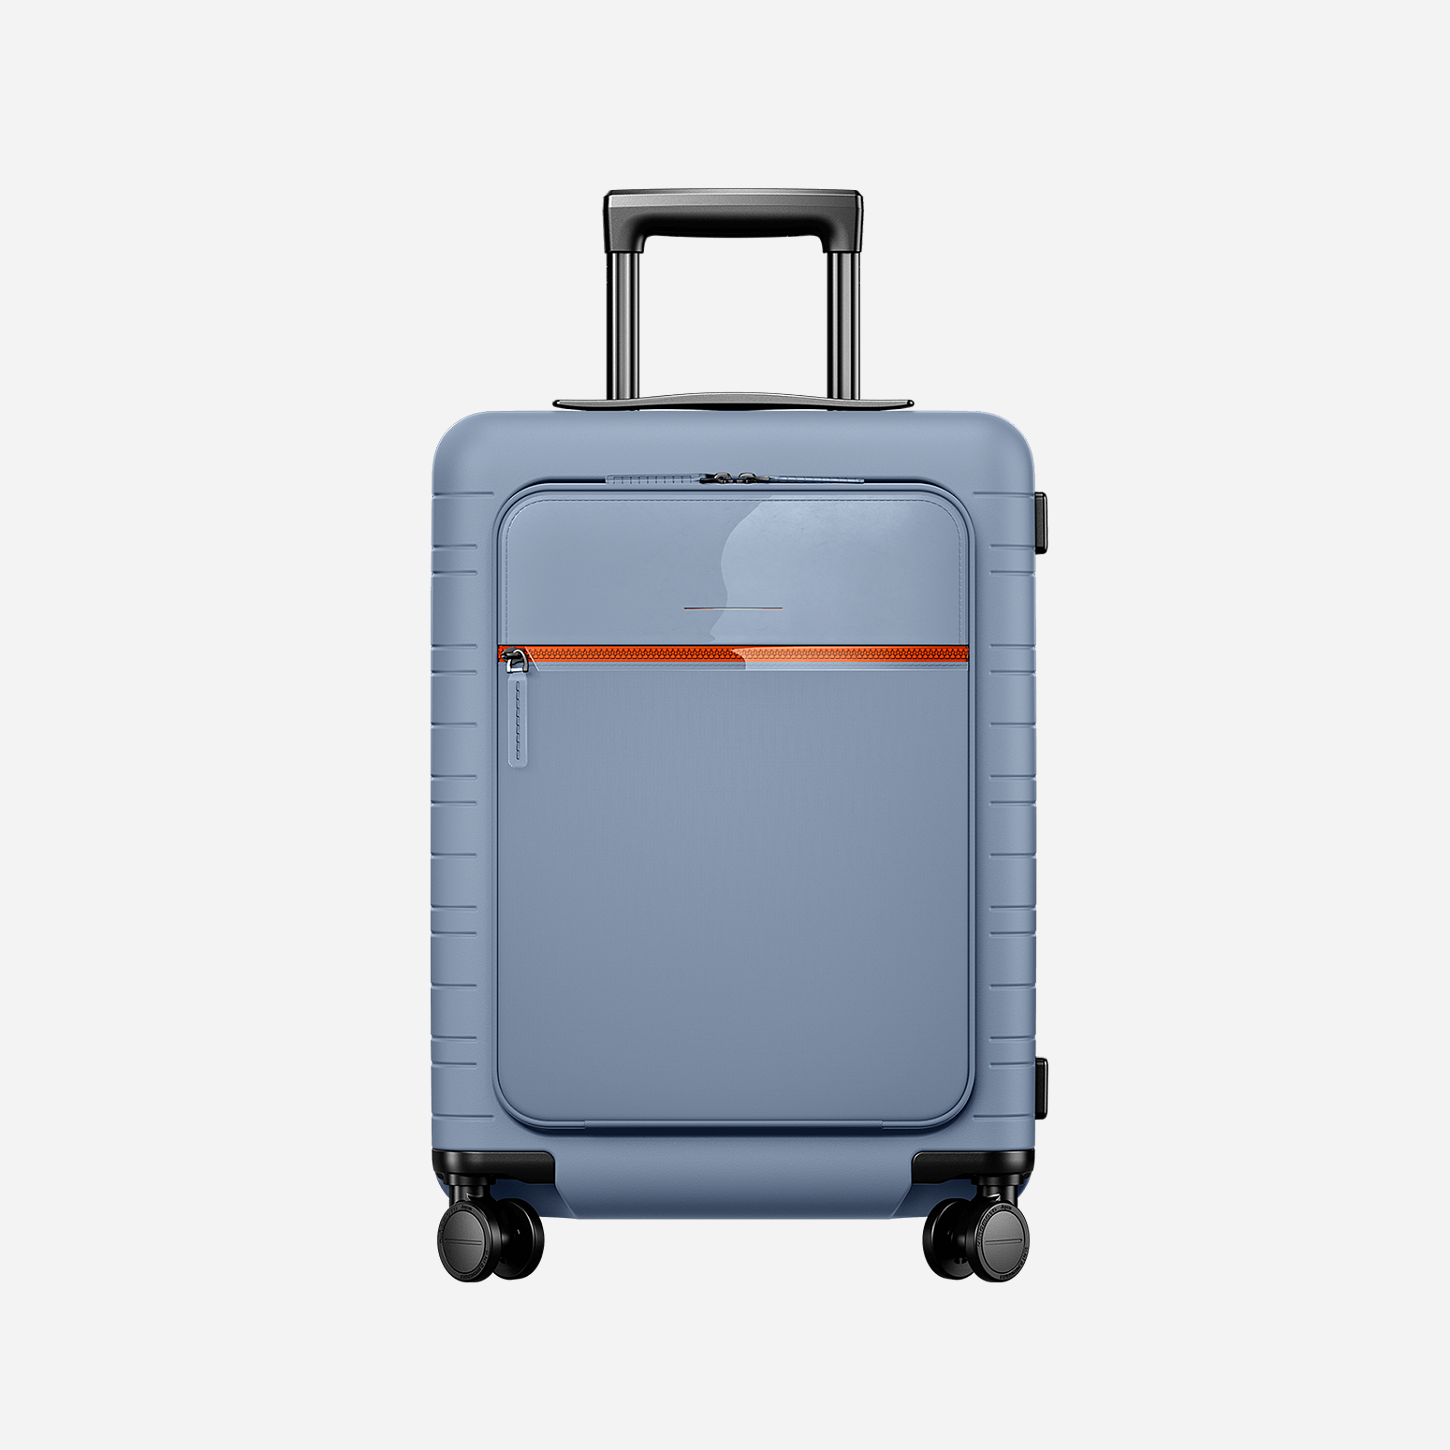 Horizn Studios M5: Best Sustainable Carry-On for Frequent Travelers